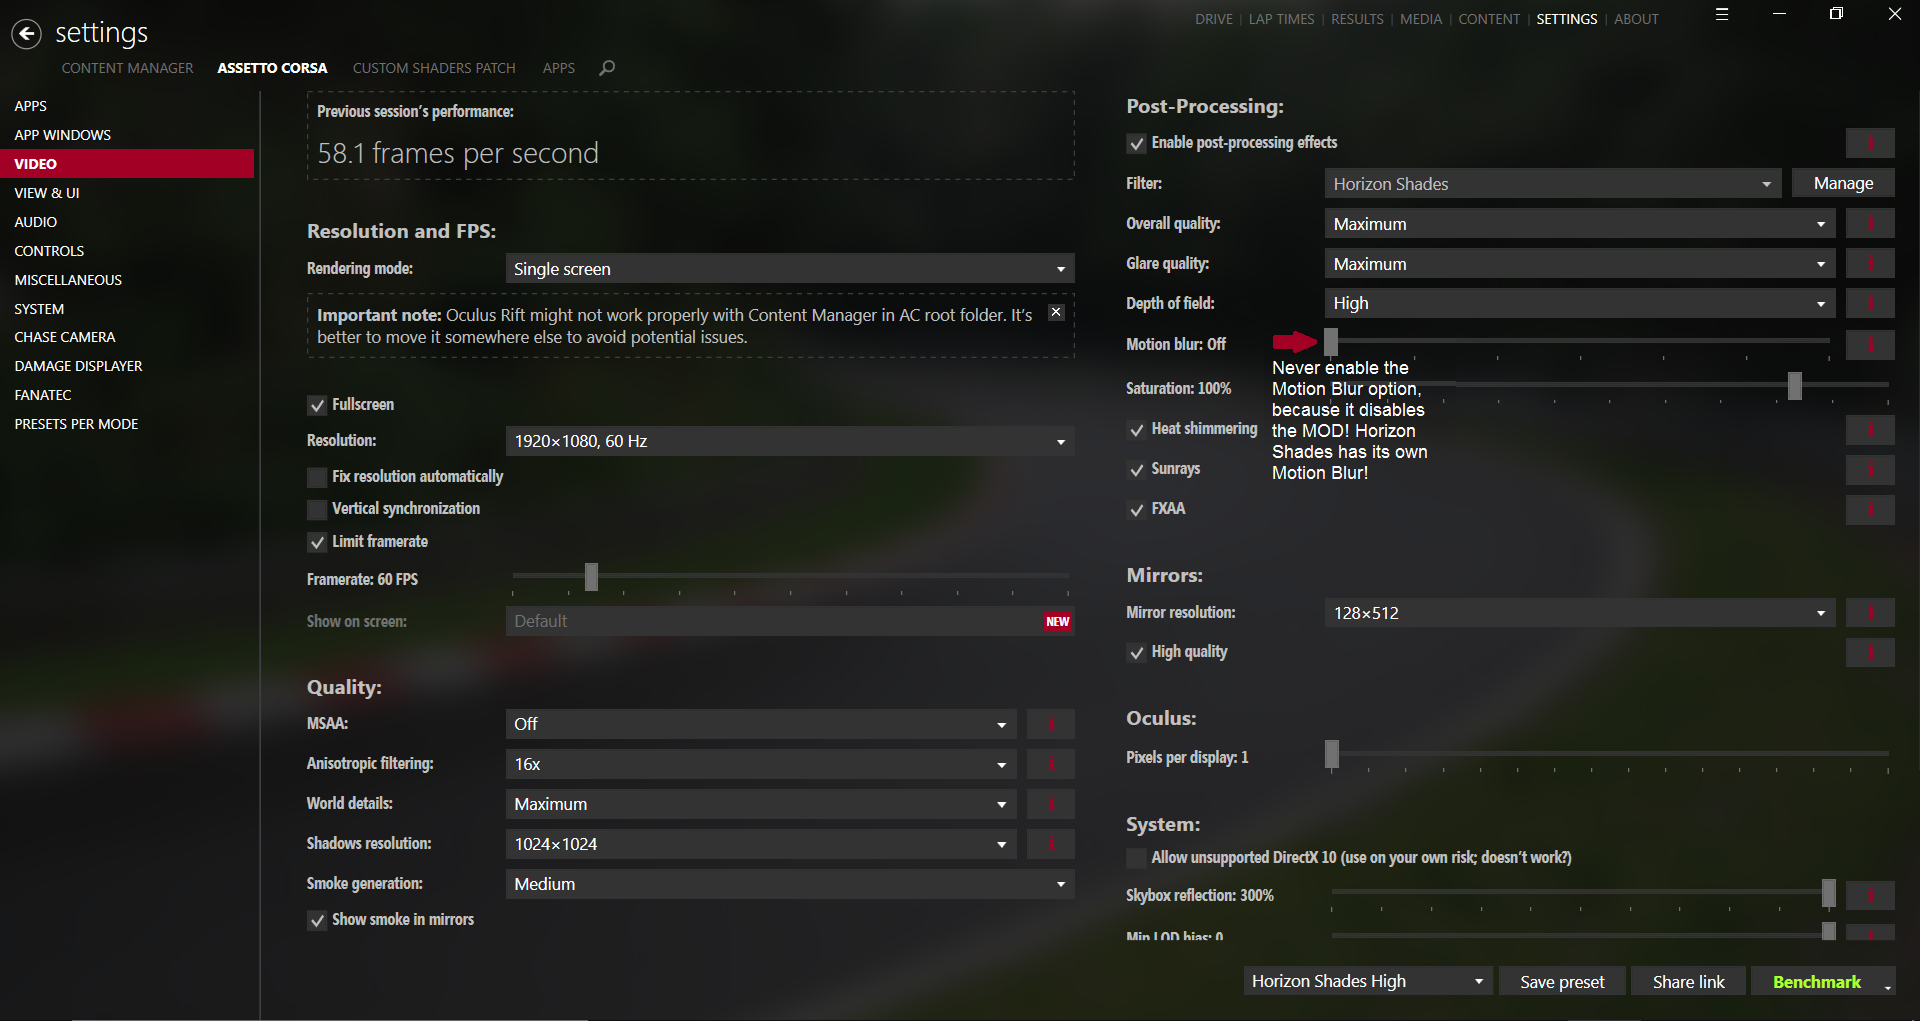 AcTools Cars Manager – Assetto Corsa